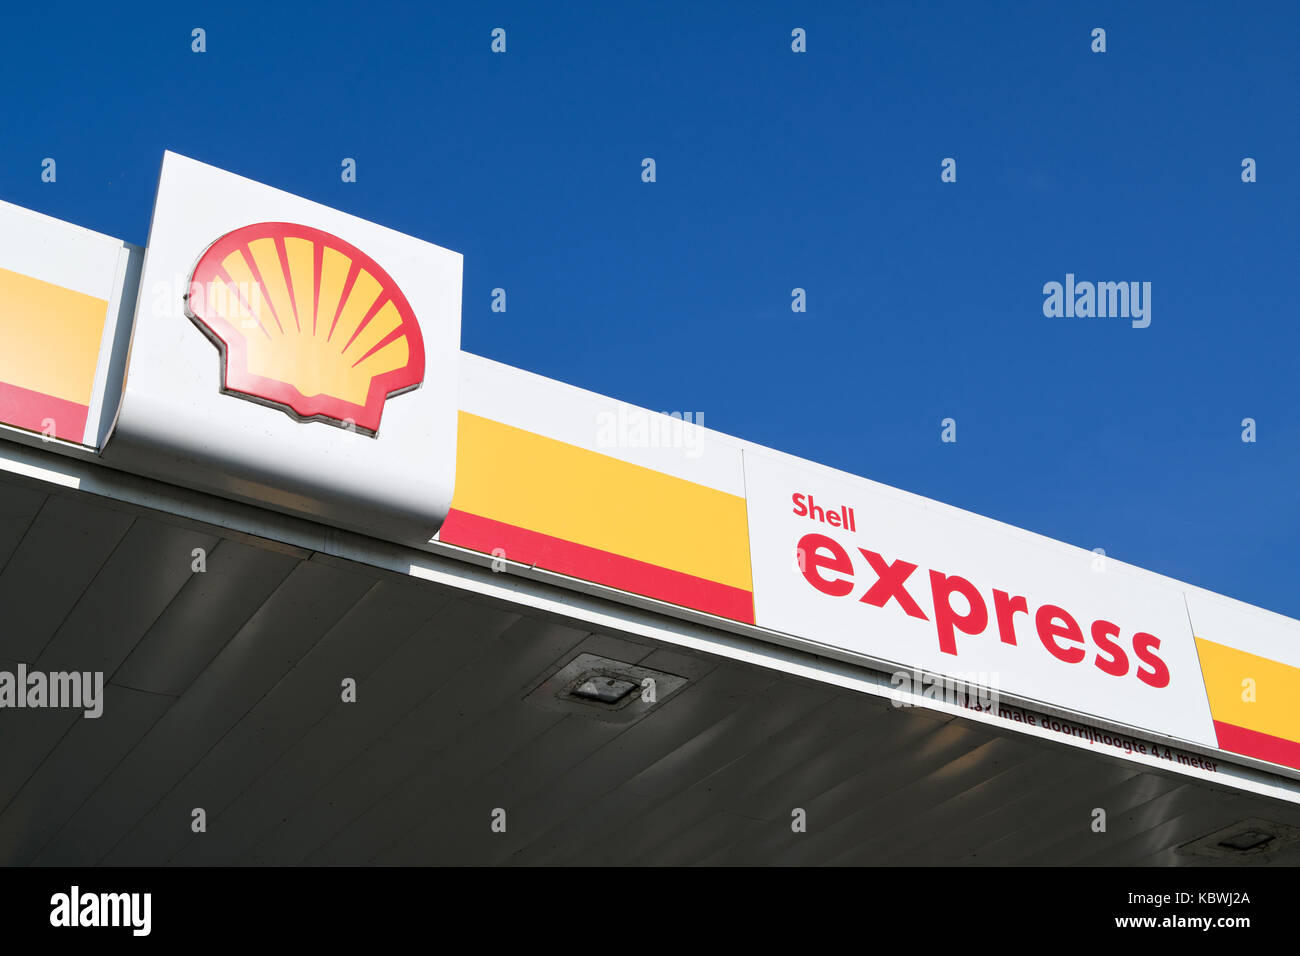 Shell sign against blue sky. Shell is an Anglo-Dutch multinational oil and gas company headquartered in the Netherlands and incorporated in the UK. Stock Photo